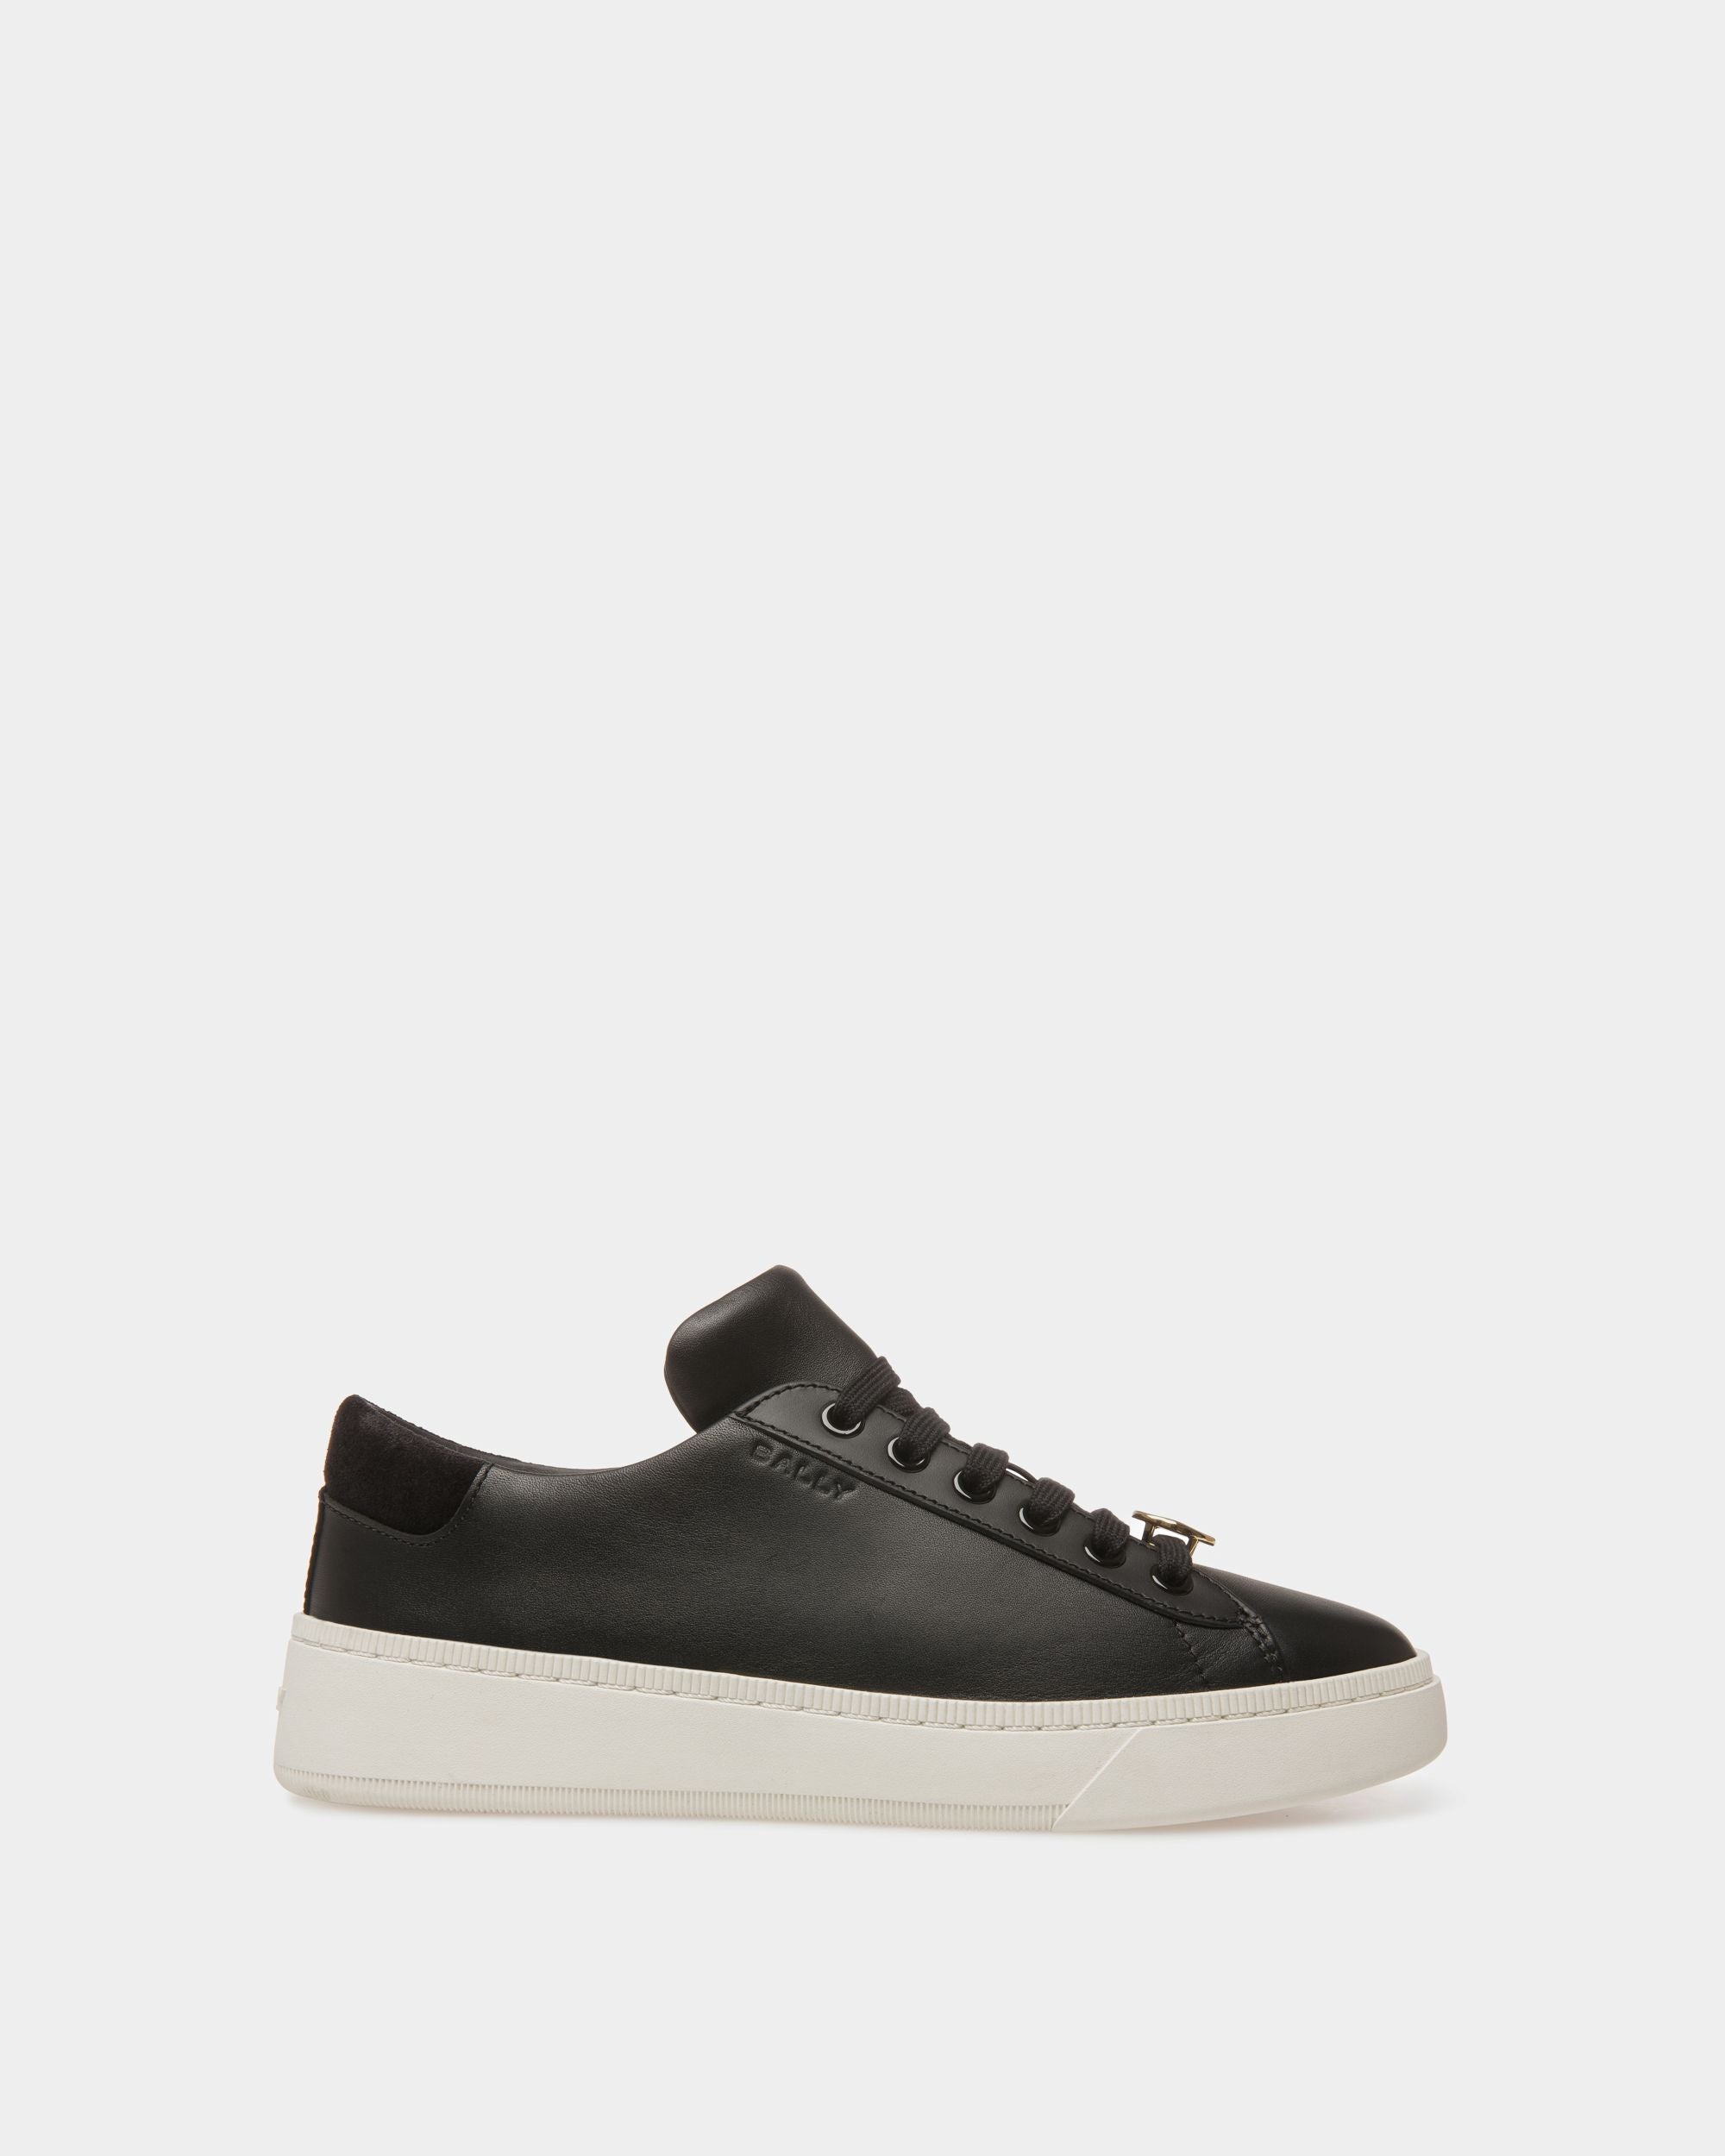 Ryver | Women's Sneakers | Black And White Leather | Bally | Still Life Side